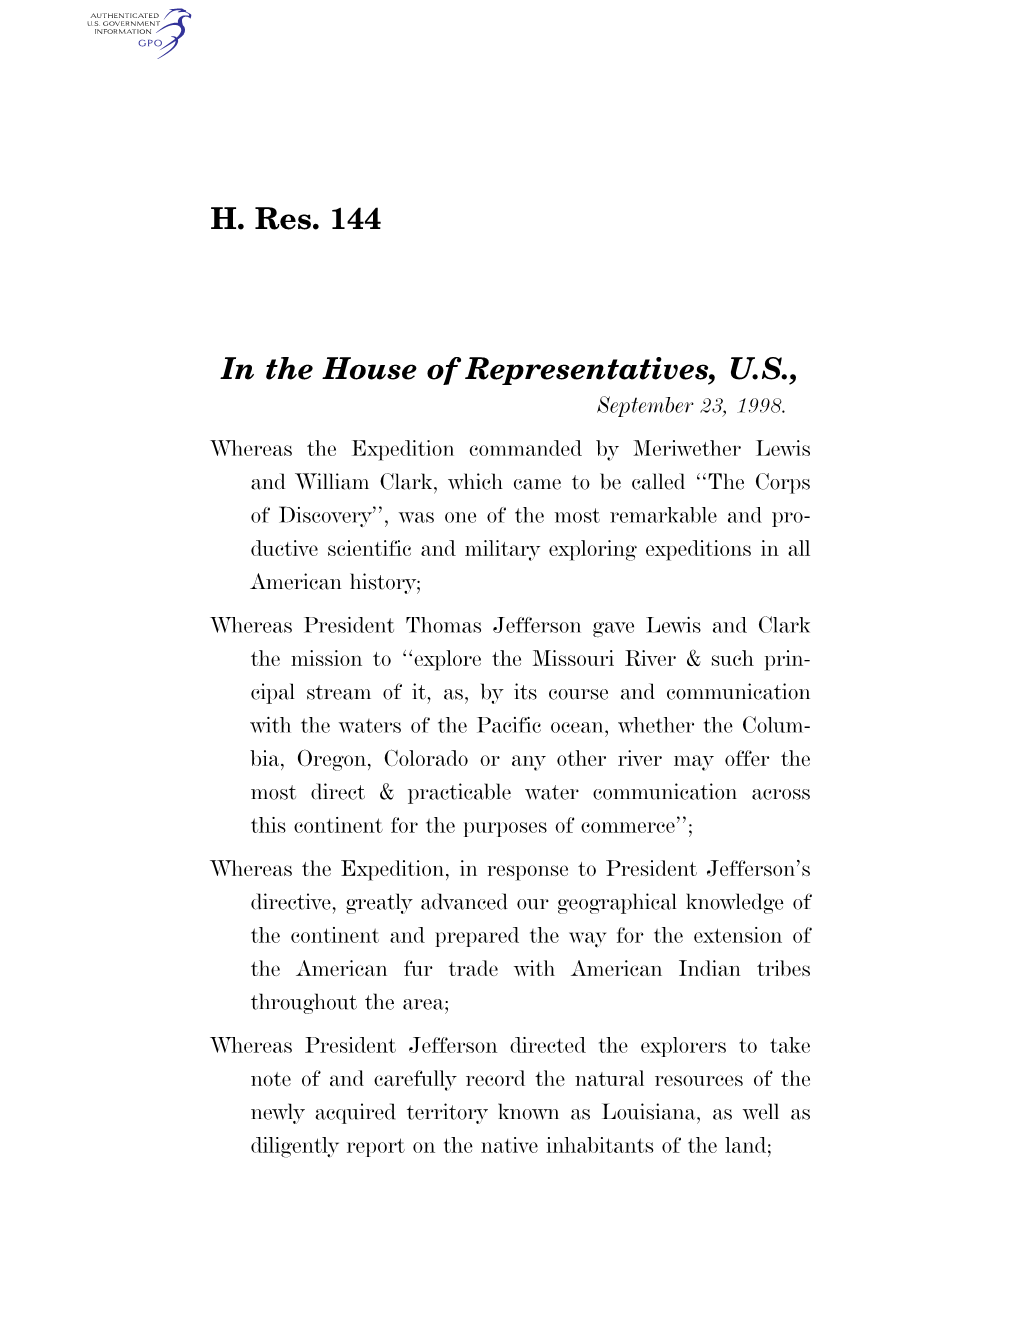 H. Res. 144 in the House of Representatives, U.S